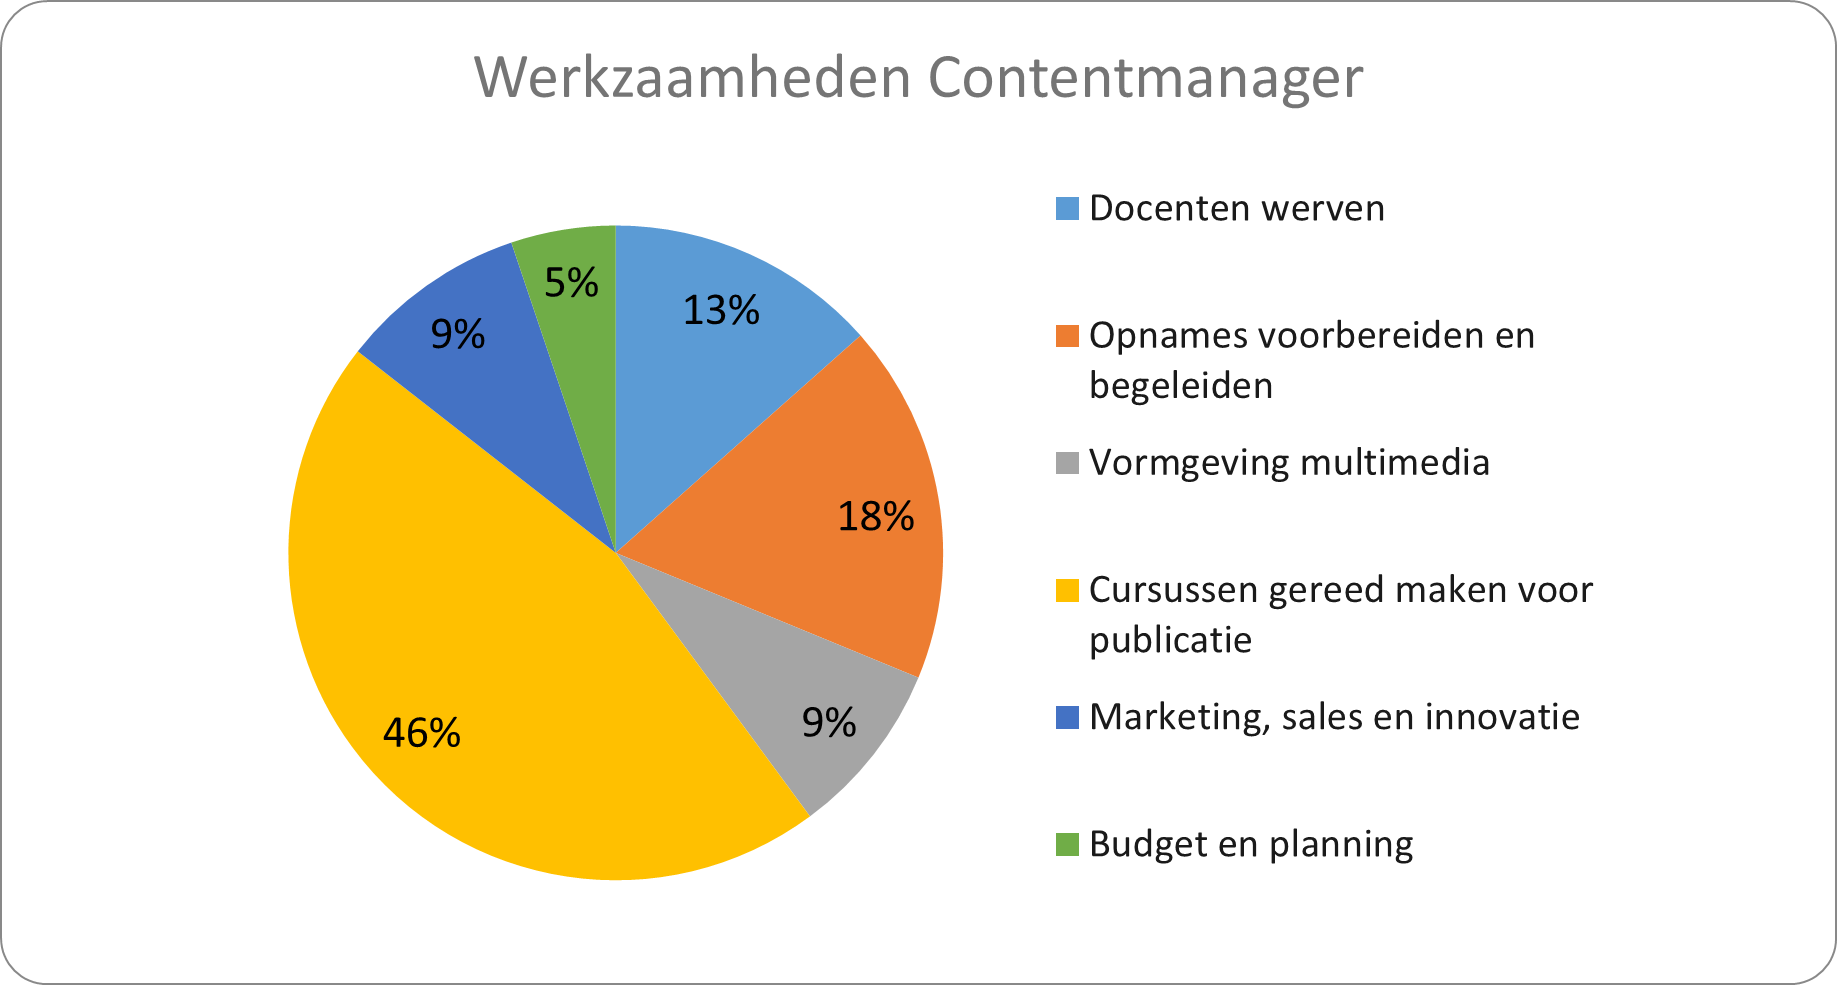 Contentmanager